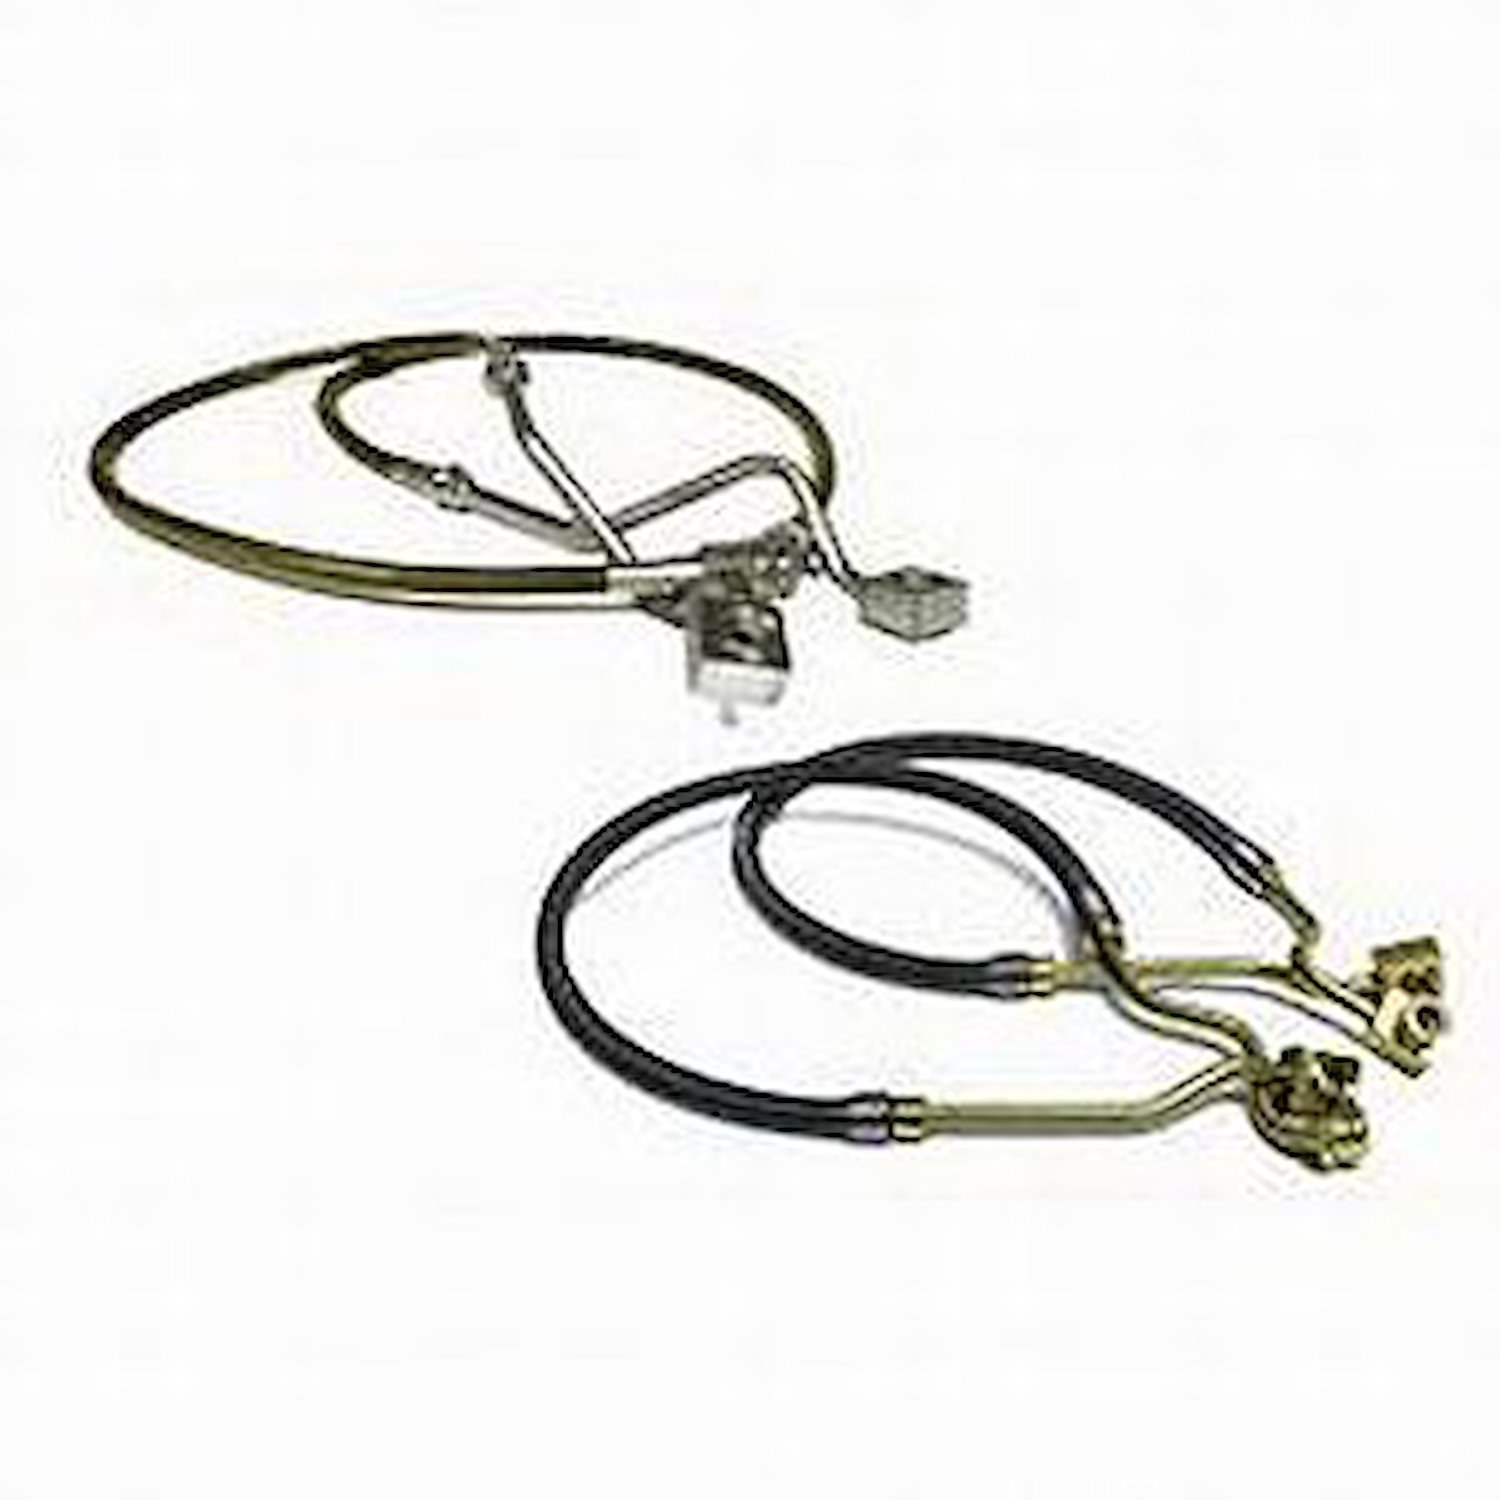 Bullet Proof Kevlar  Brake Hose Front Reinforced Braided Stainless Steel Vehicles w/3-4 in. Lift